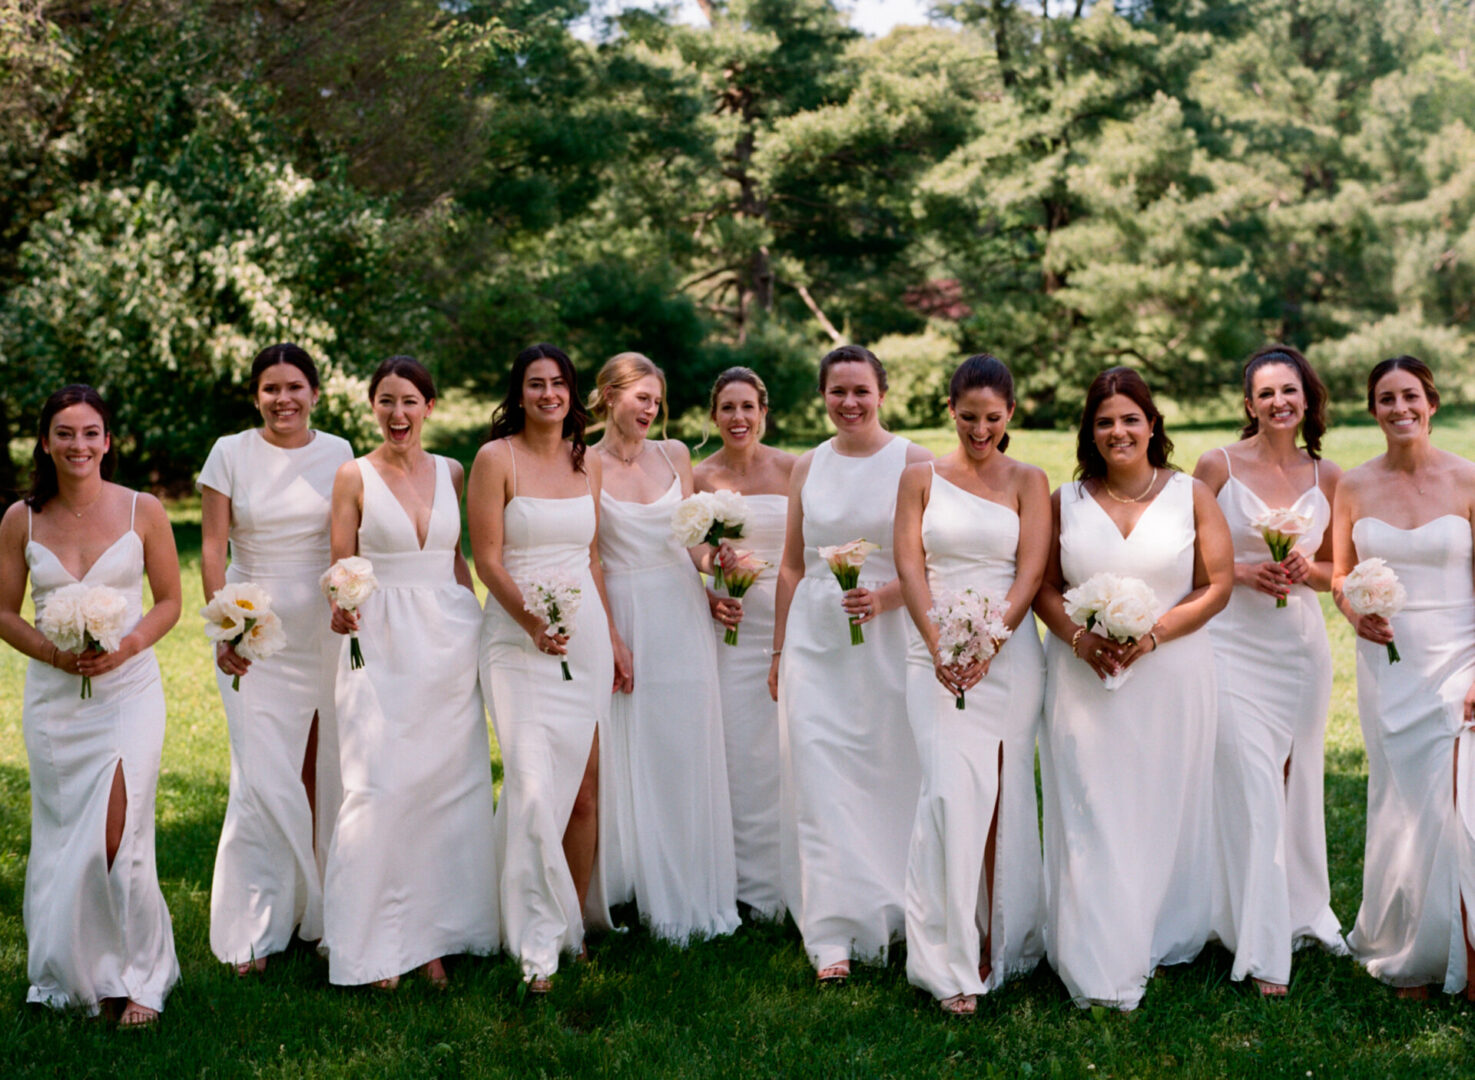 A group of brides mate holding flowers